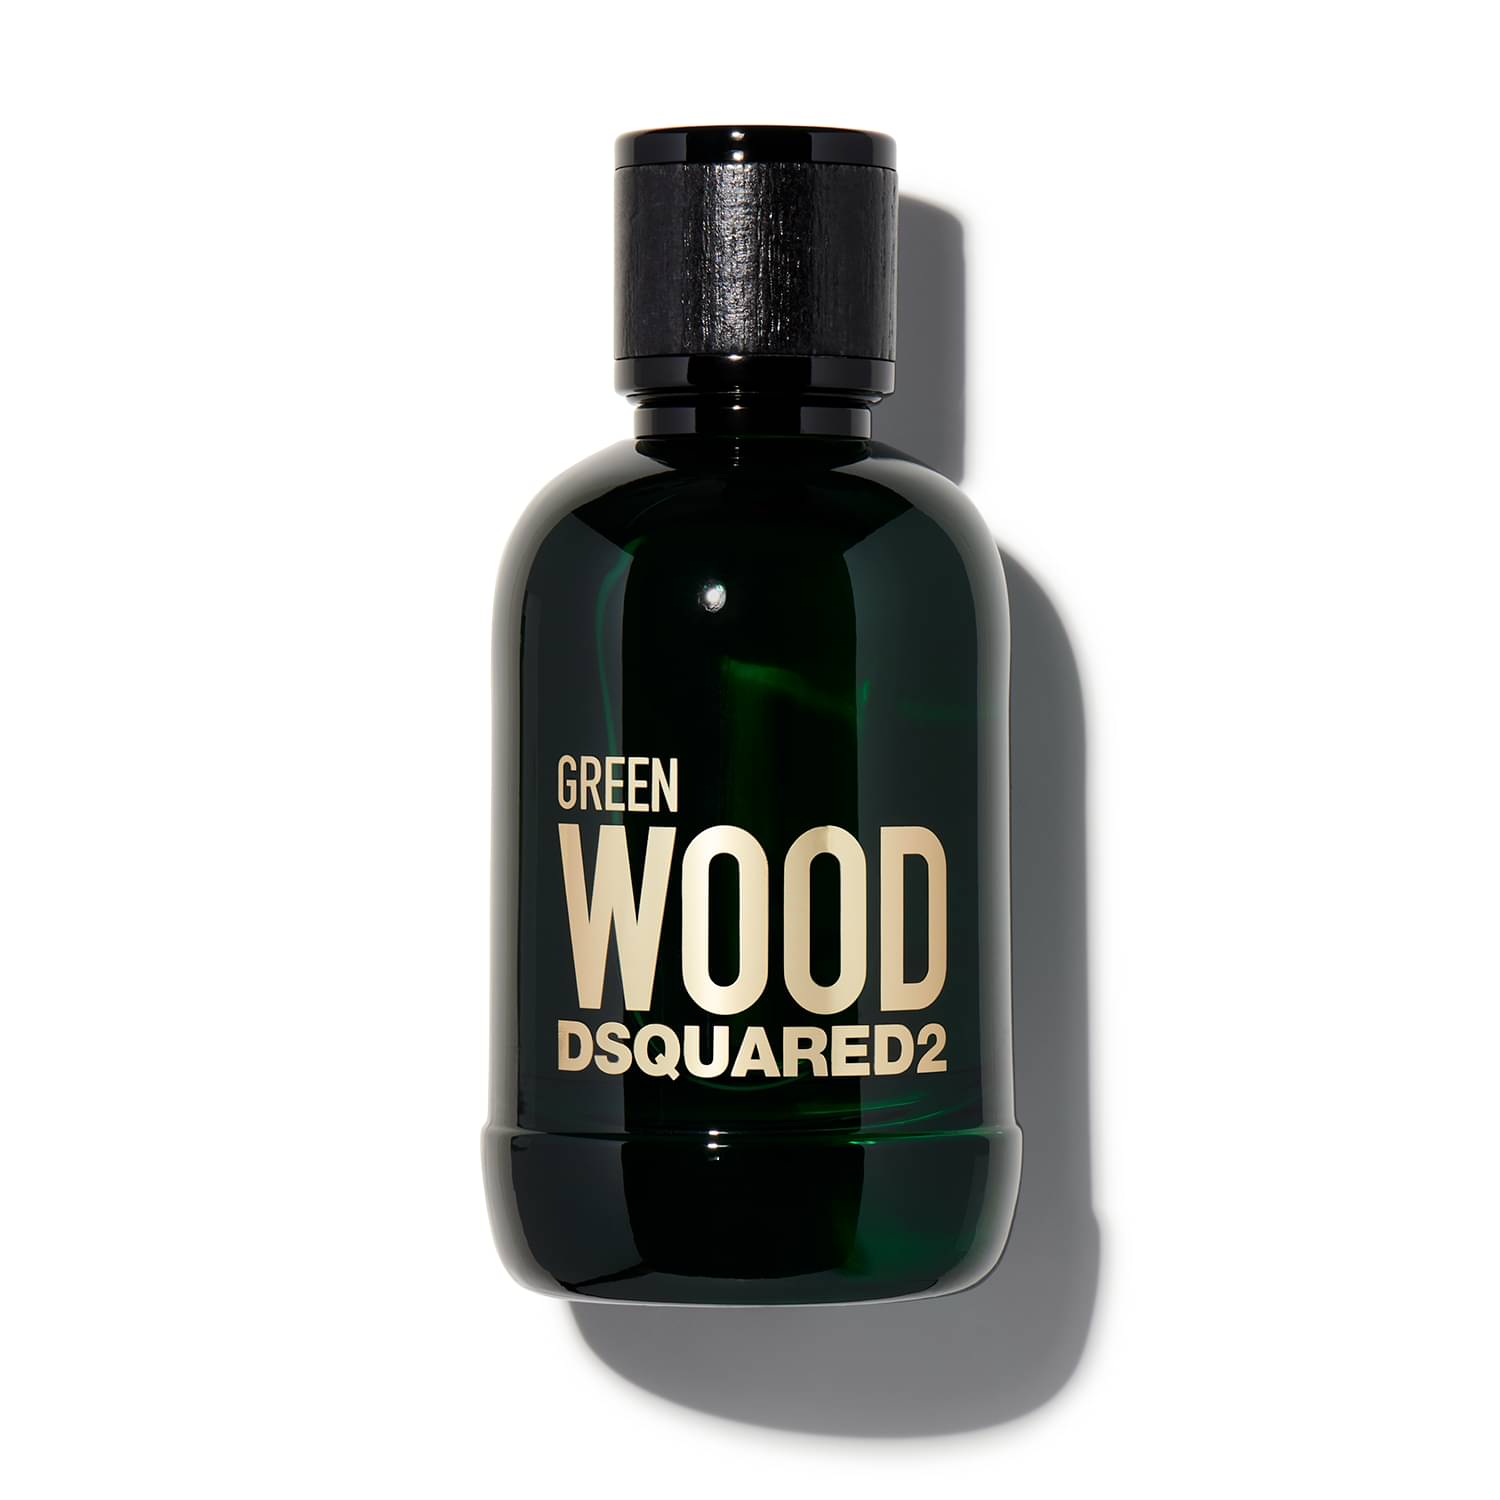 DSQUARED² Green Wood for $16.95 per month | Scentbird